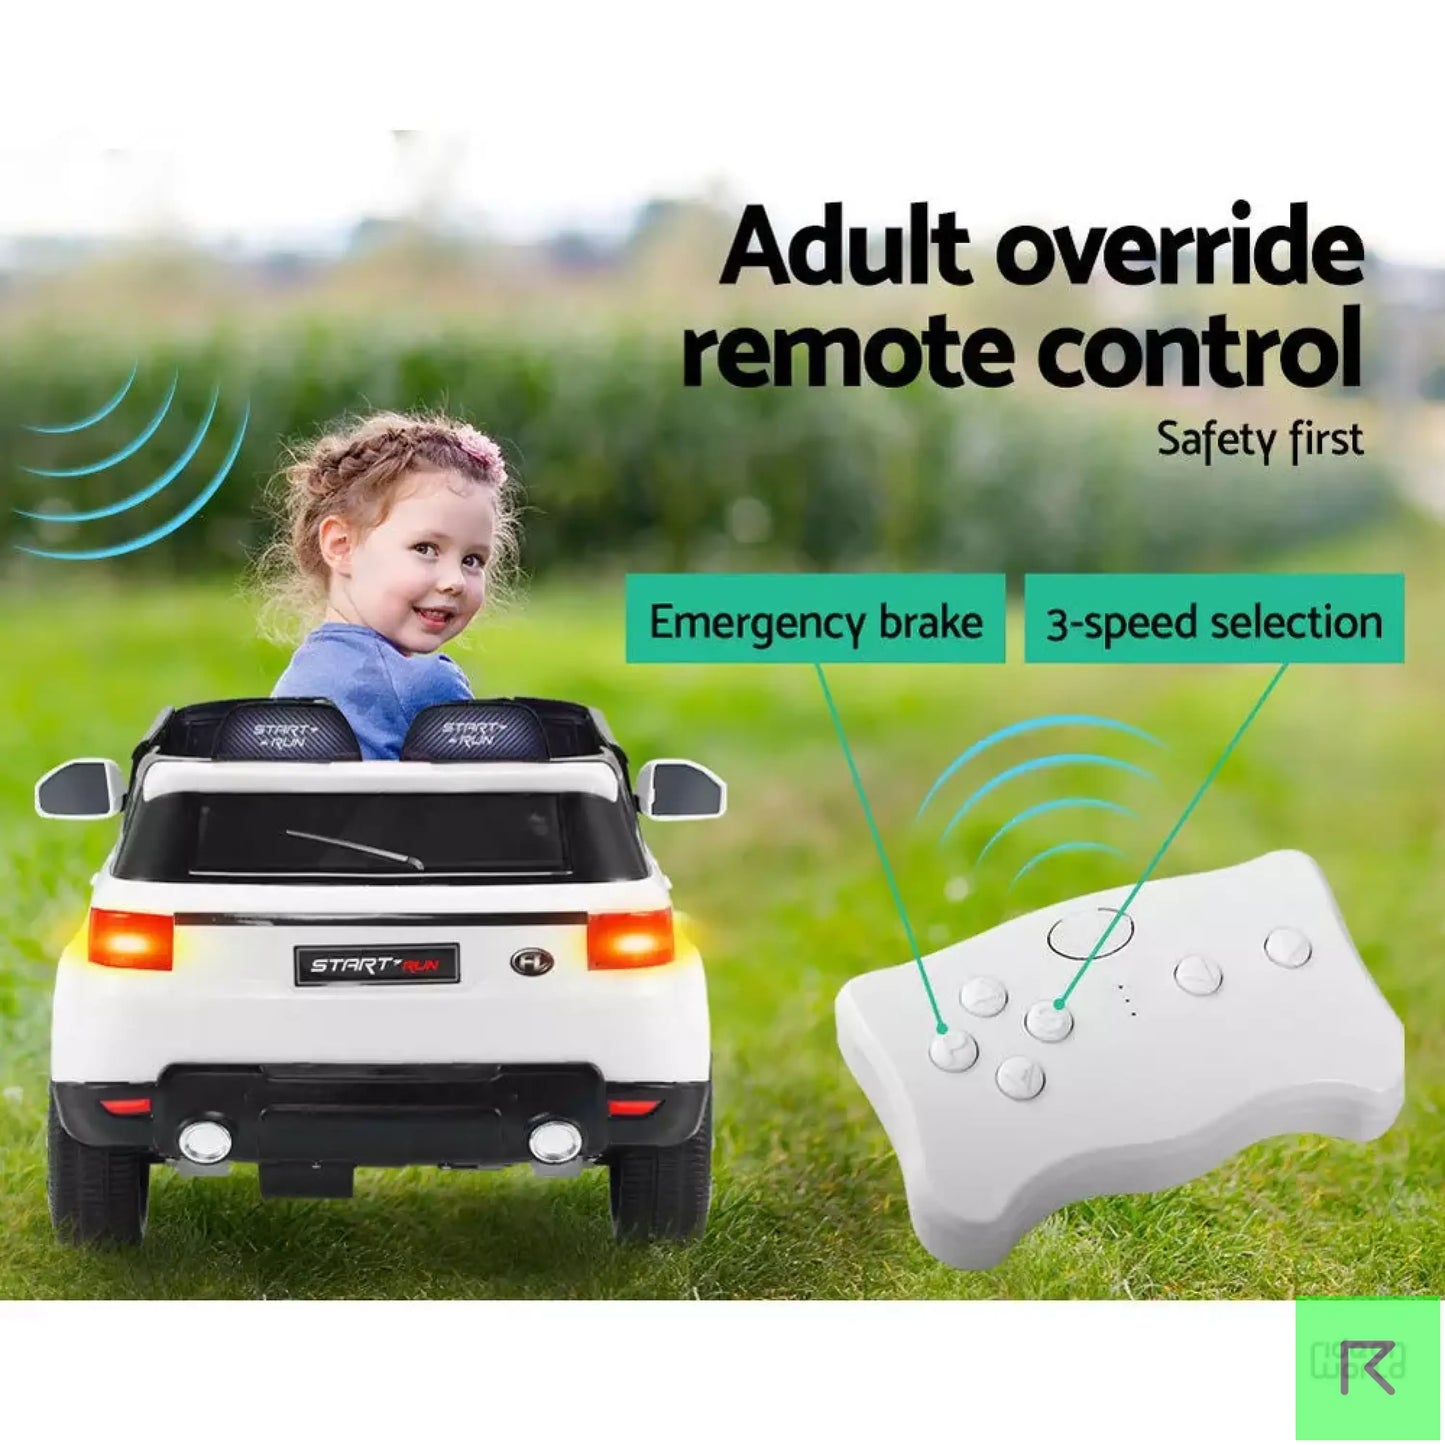 ROVER WHITE kids ride on electric car